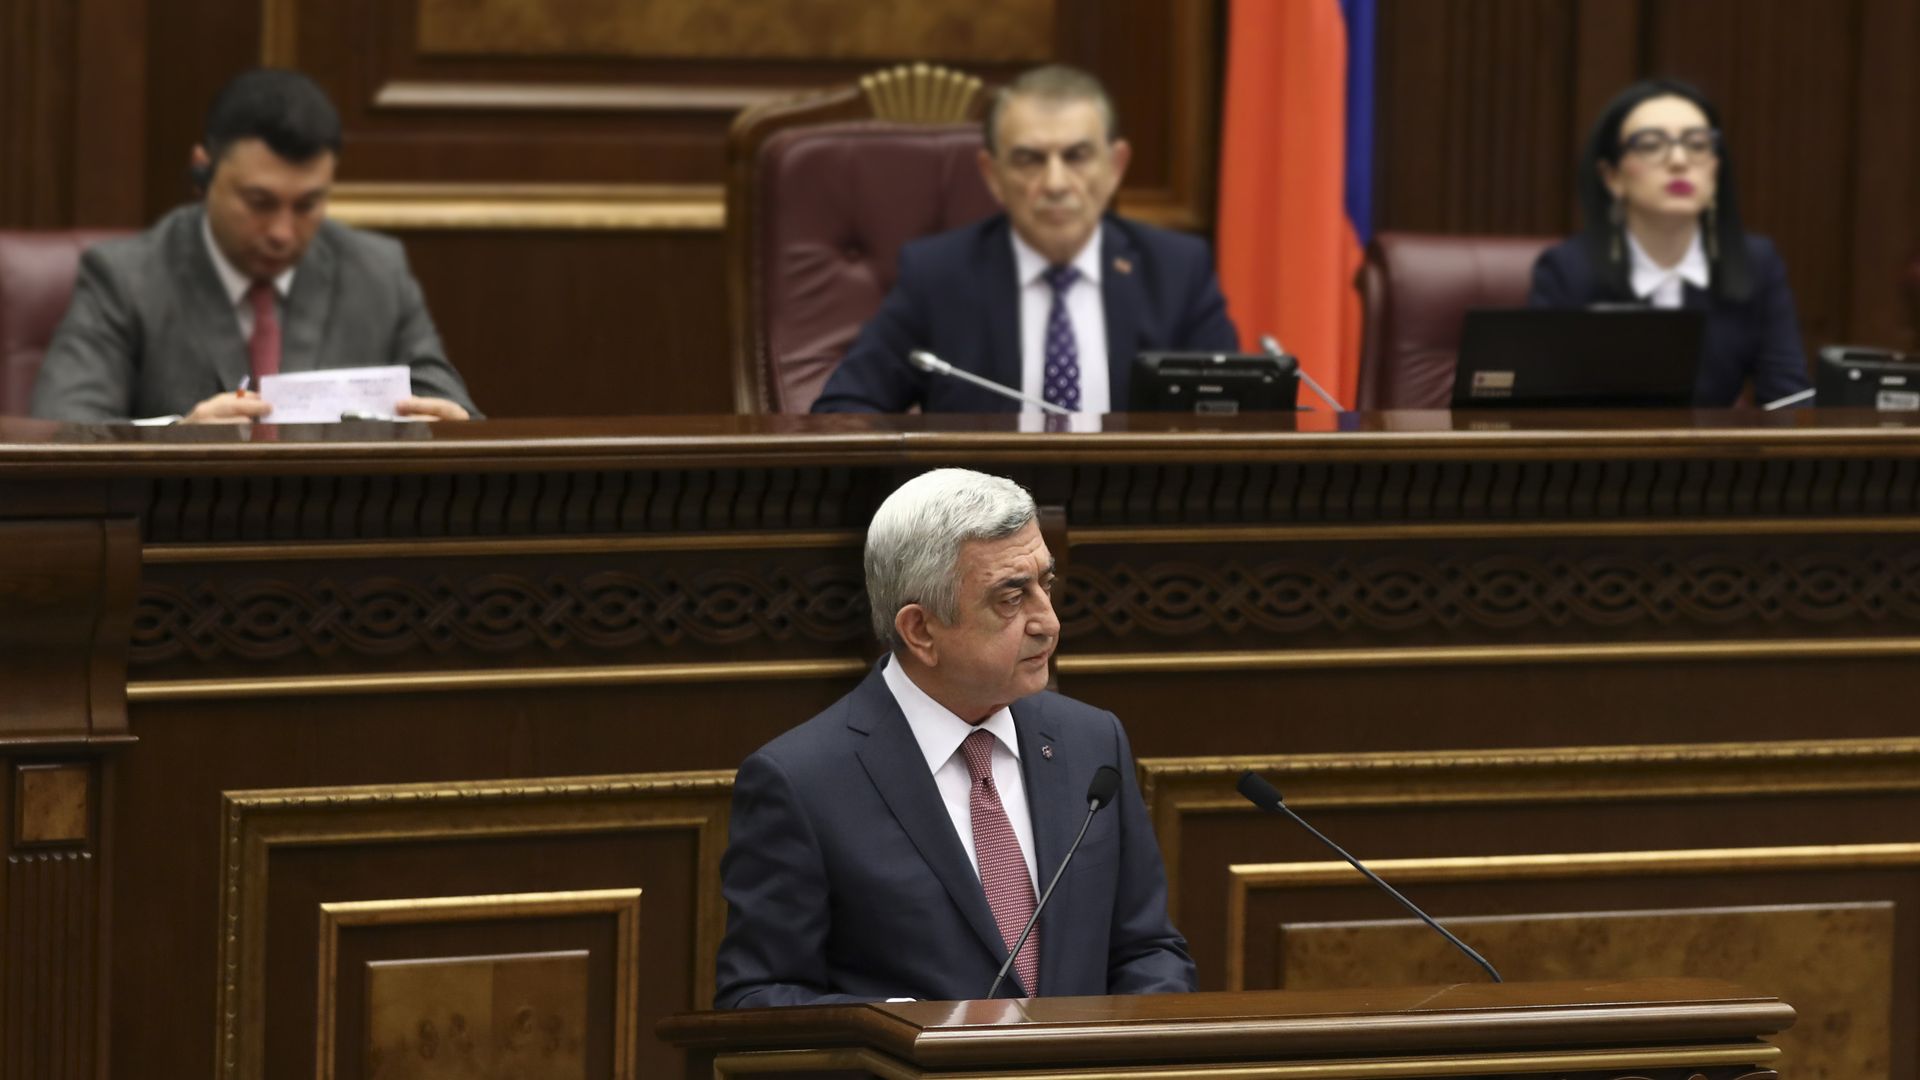 Armenia's former president Serzh Sarkisian at a session of parliament in Yerevan.